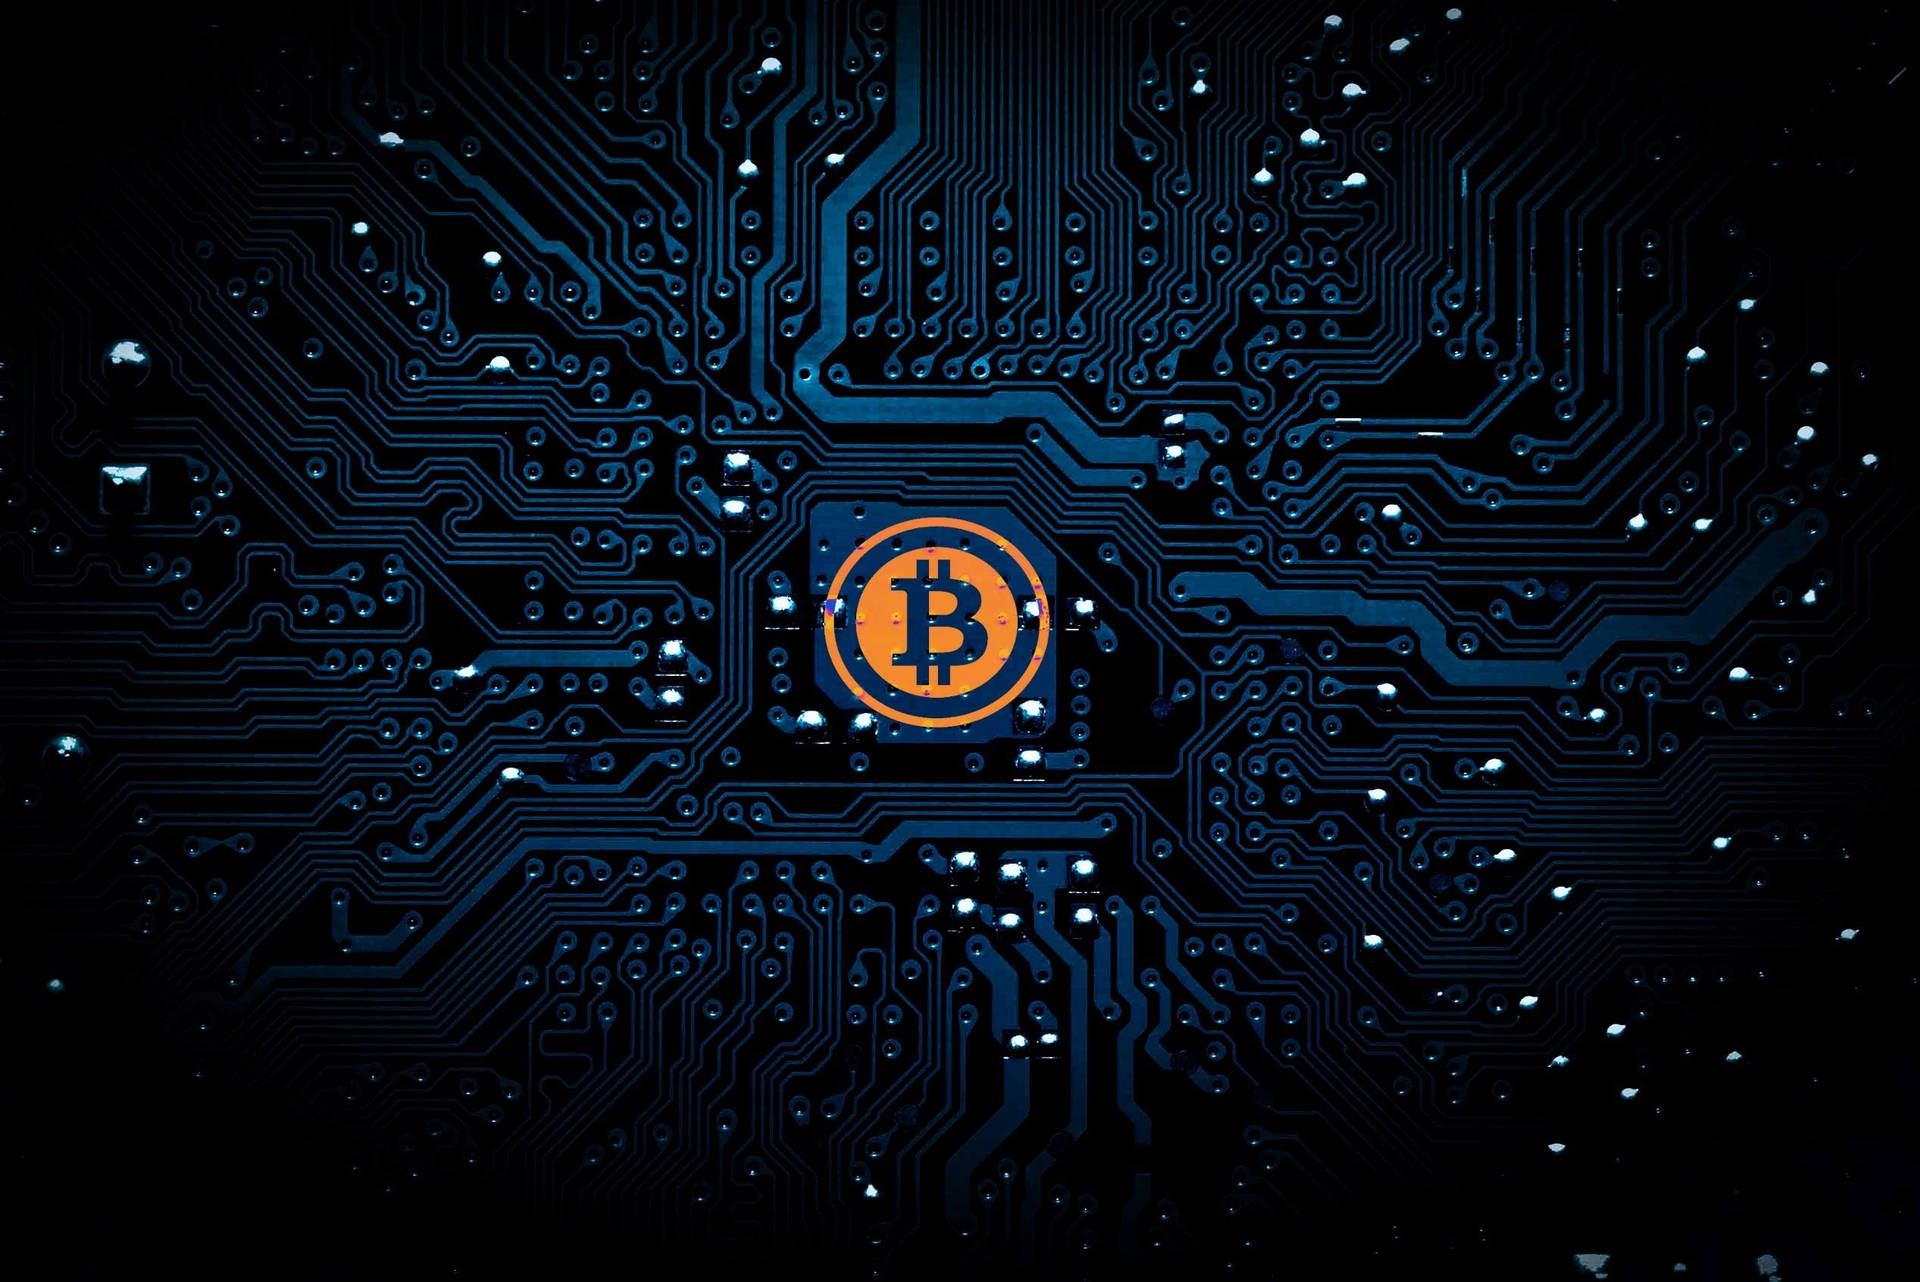 Crypto Bitcoin On Dark Teal Motherboard Background